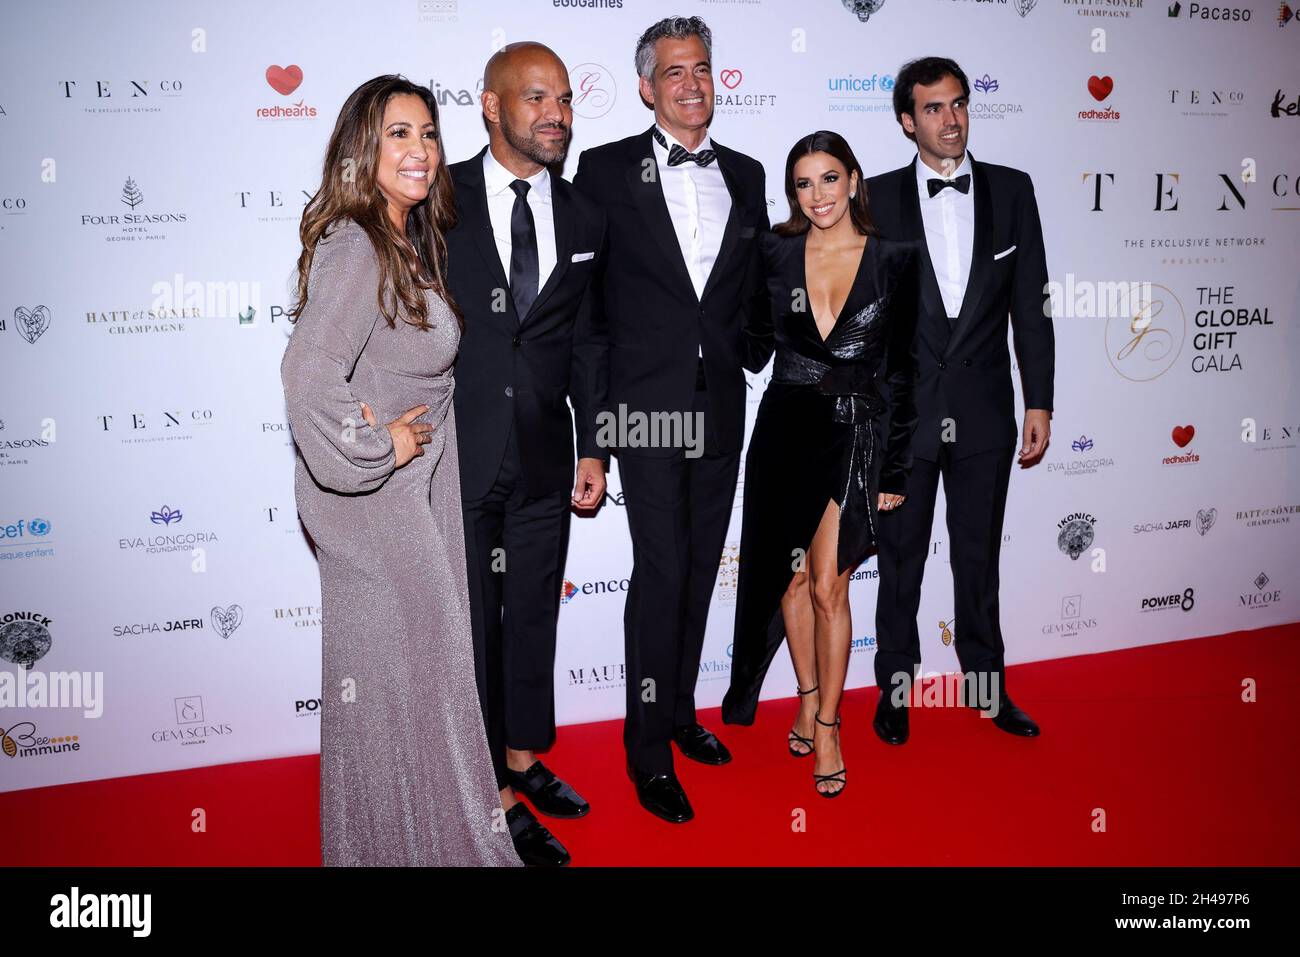 Paris, France. 30th Oct, 2021. Maria Bravo, Amaury Nolasco, Eva Longoria and guests arrive to the Global Gift Gala on October 30, 2021 at George V in Paris, France. (Photo by Lyvans Boolaky/ÙPtertainment/Sipa USA) Credit: Sipa USA/Alamy Live News Stock Photo